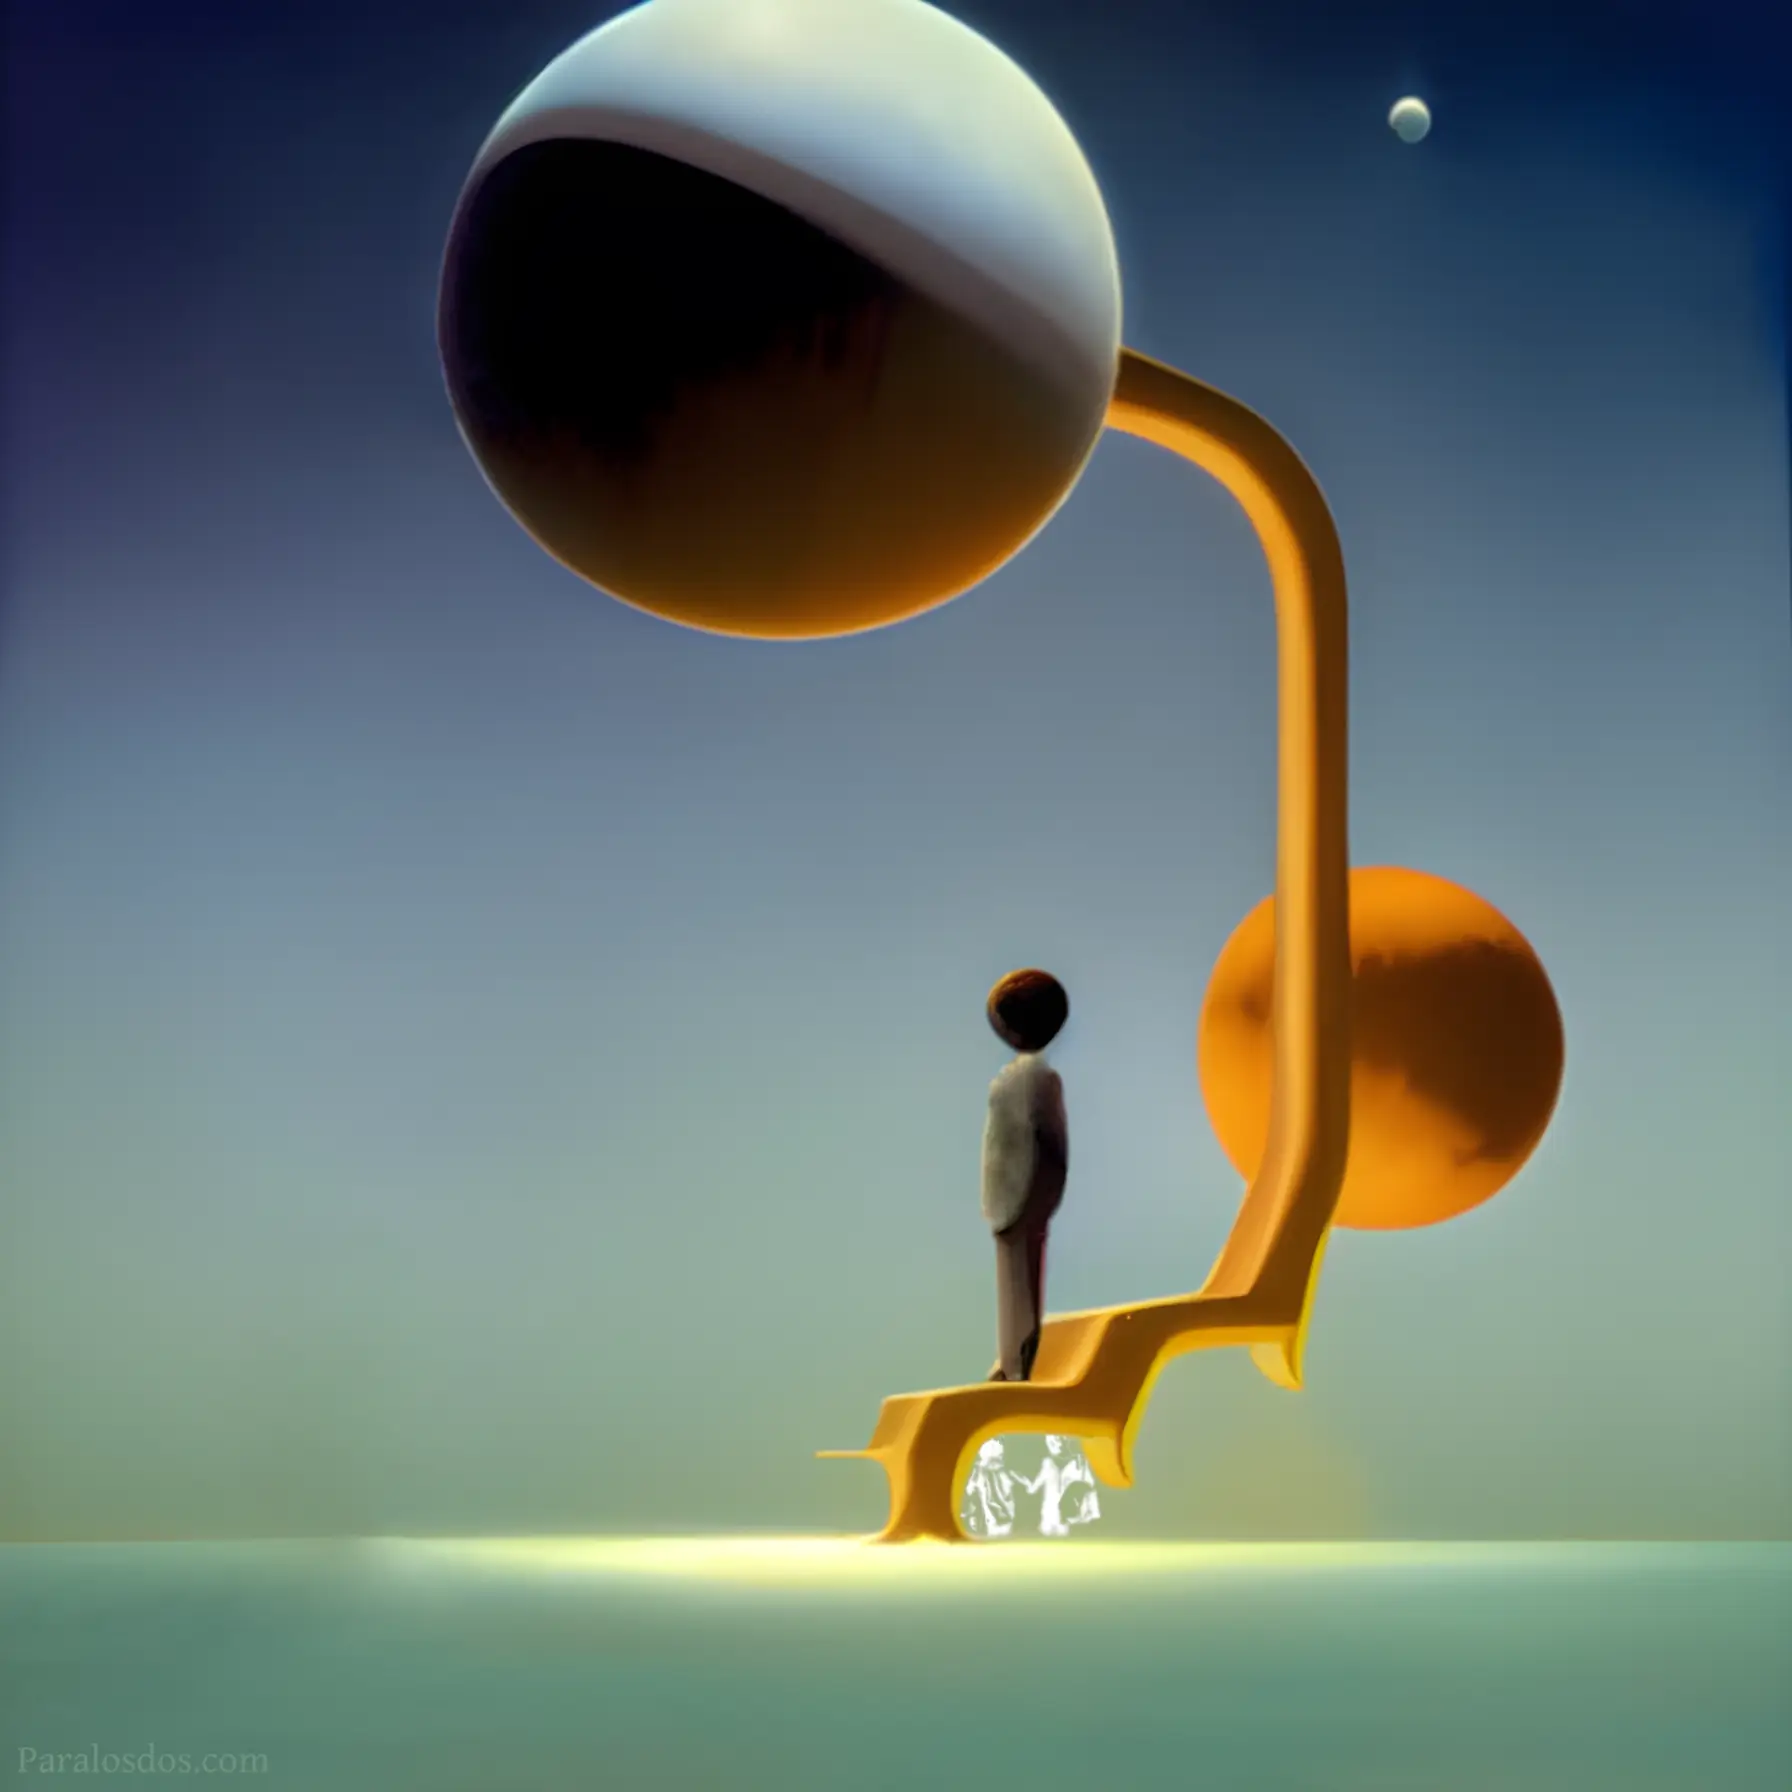 A fantastical artistic rendering of a figure walking up steps suspended above a liquid, with planets in the background.